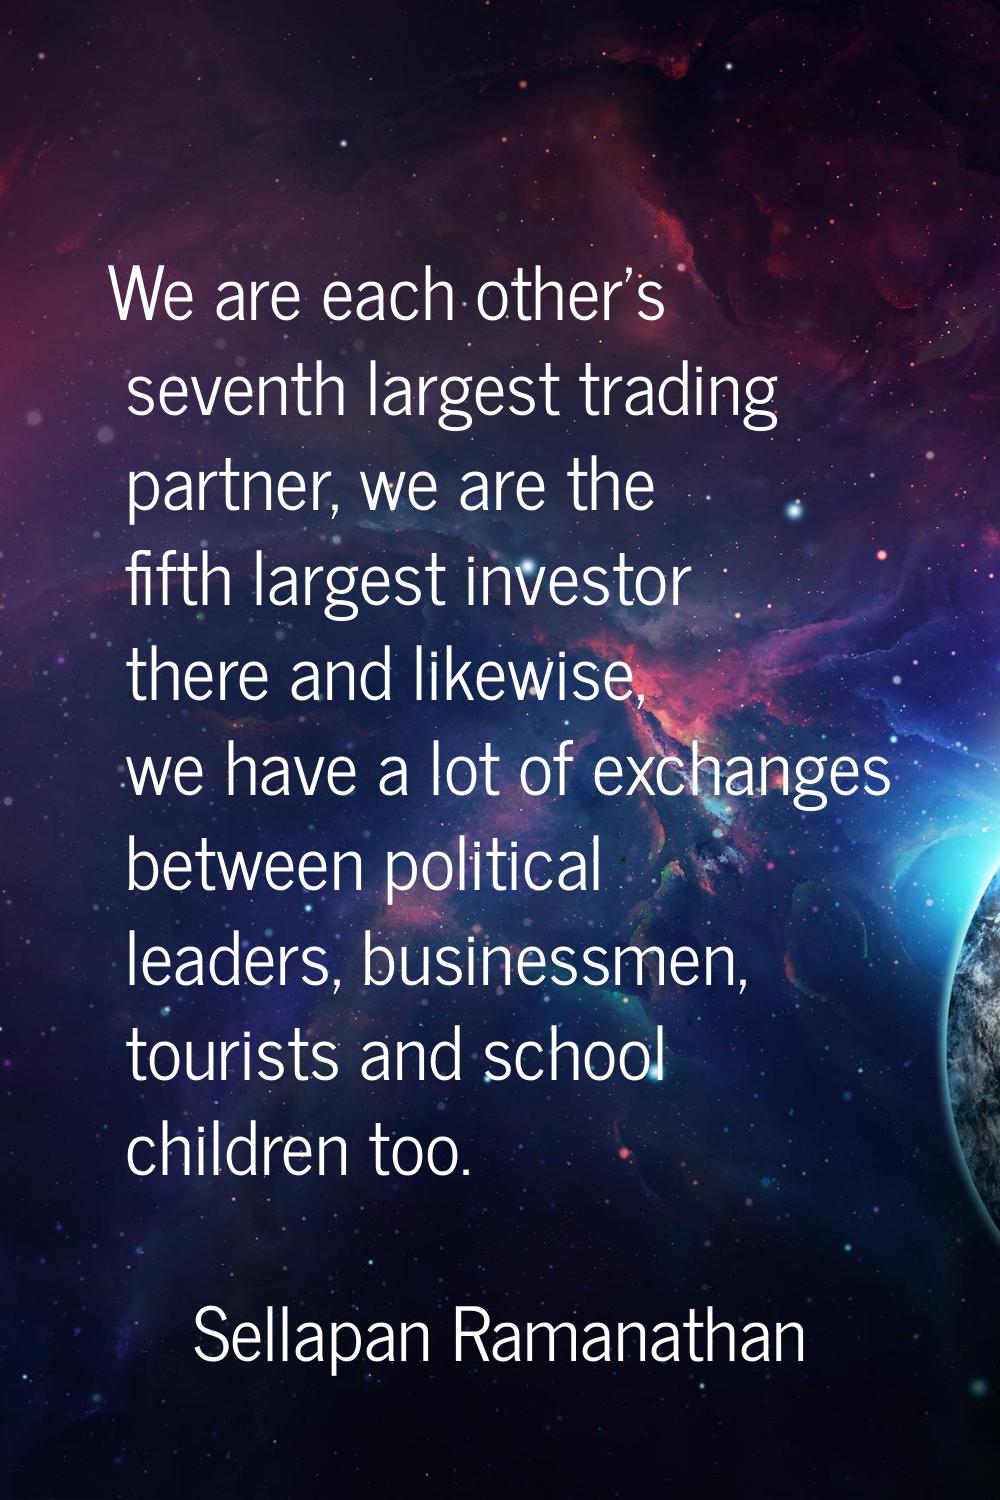 We are each other's seventh largest trading partner, we are the fifth largest investor there and li